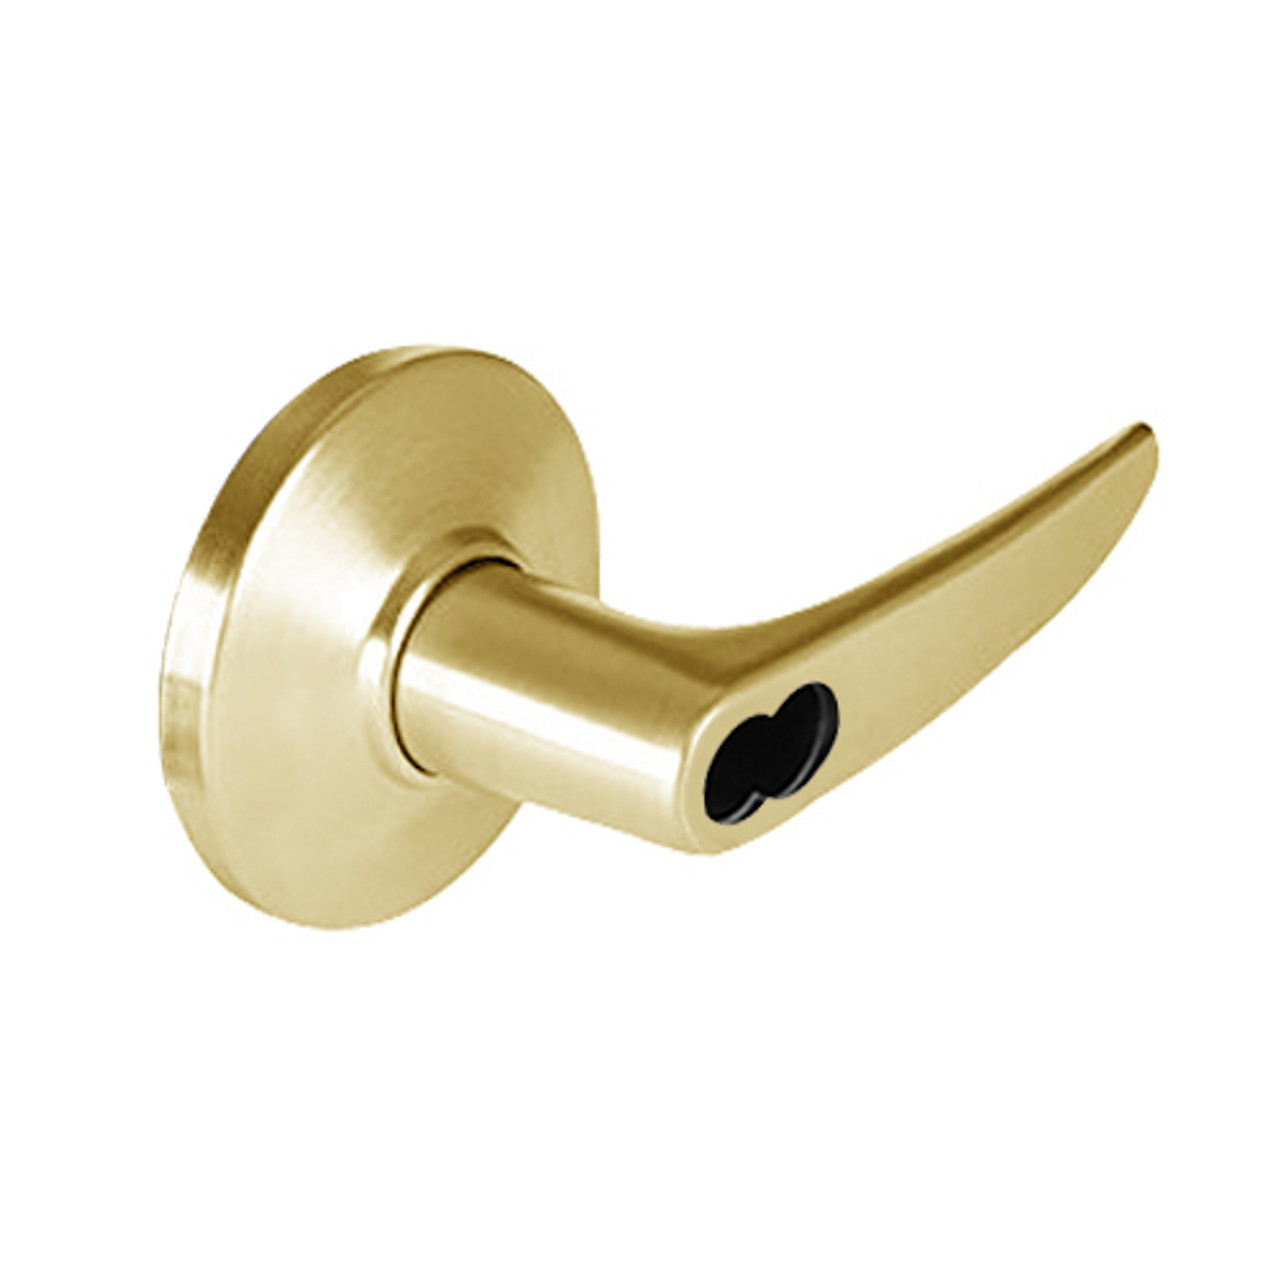 9K47T16DS3605LM Best 9K Series Dormitory Cylindrical Lever Locks with Curved without Return Lever Design Accept 7 Pin Best Core in Bright Brass